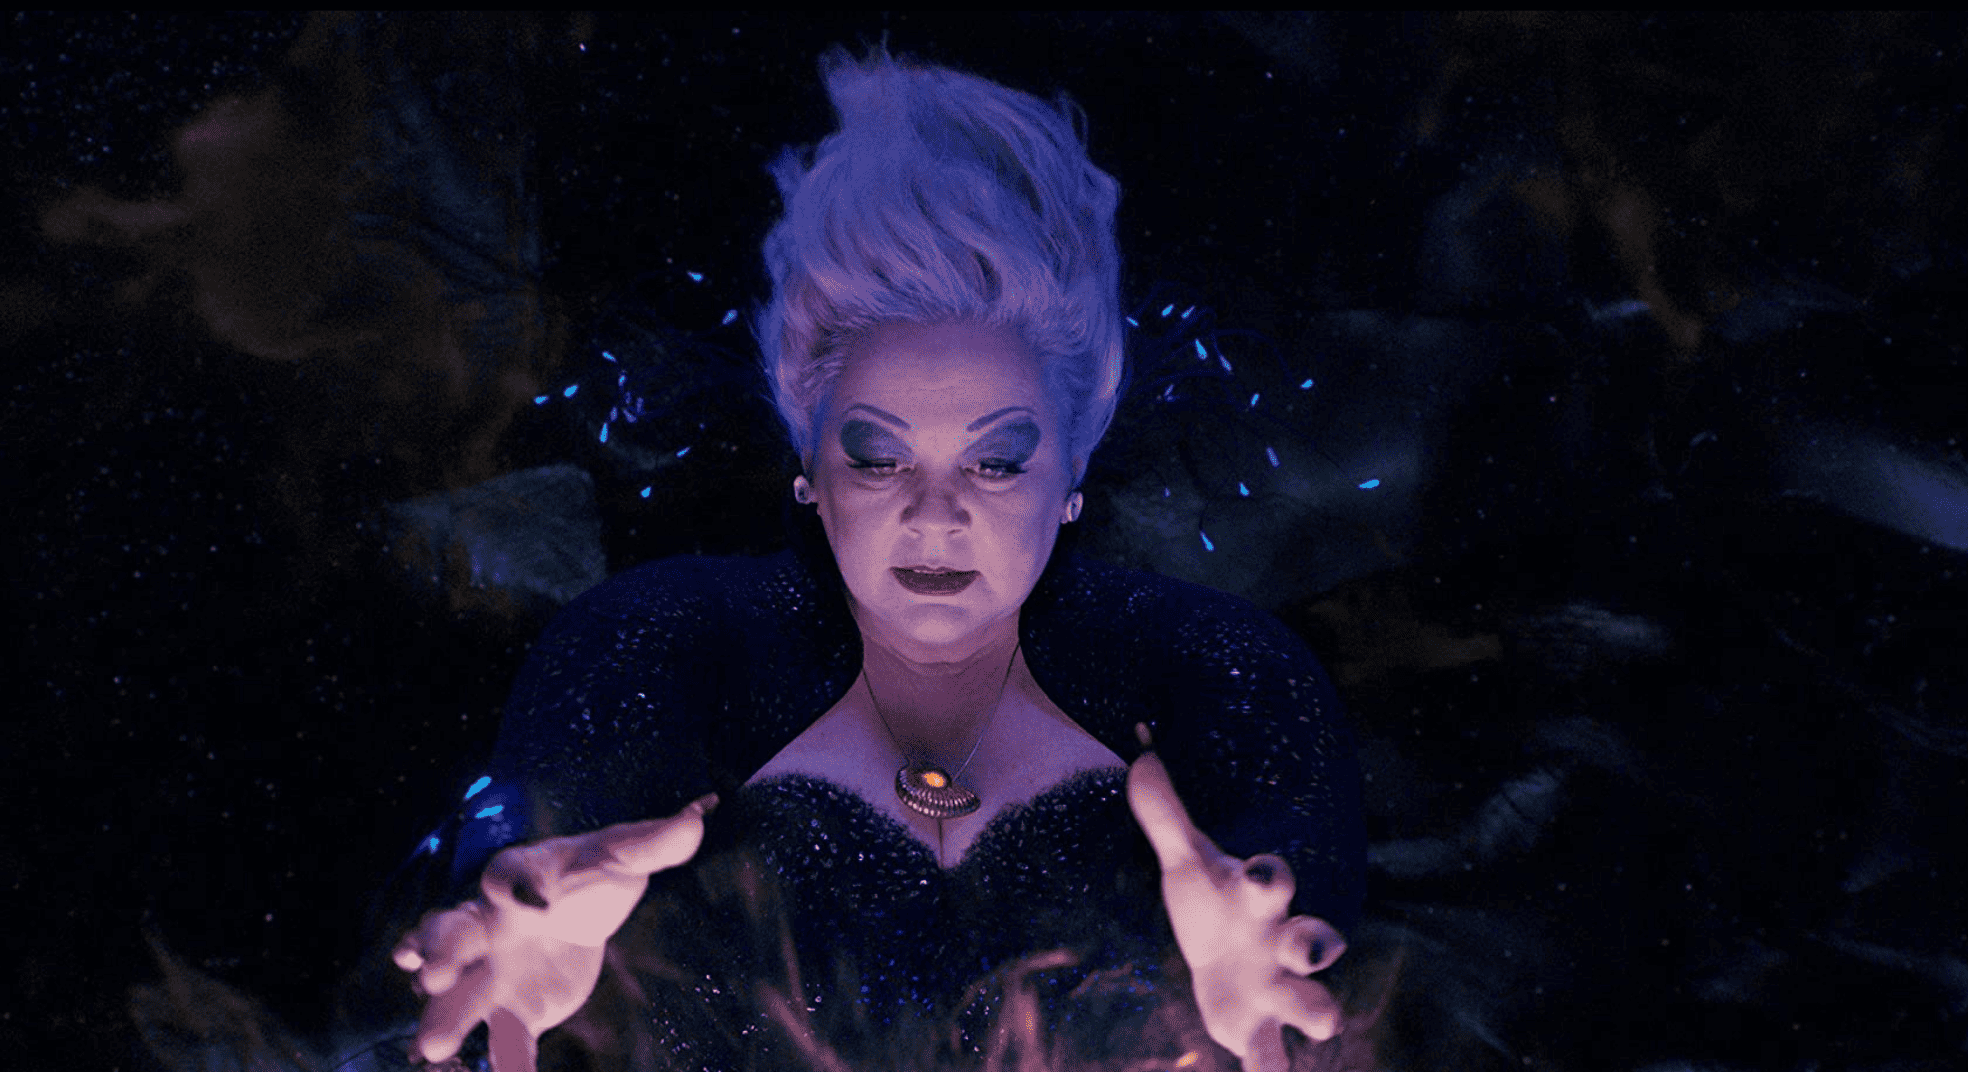 Melissa McCarthy transformed as Ursula in this image from Walt Disney Studios Motion Pictures.